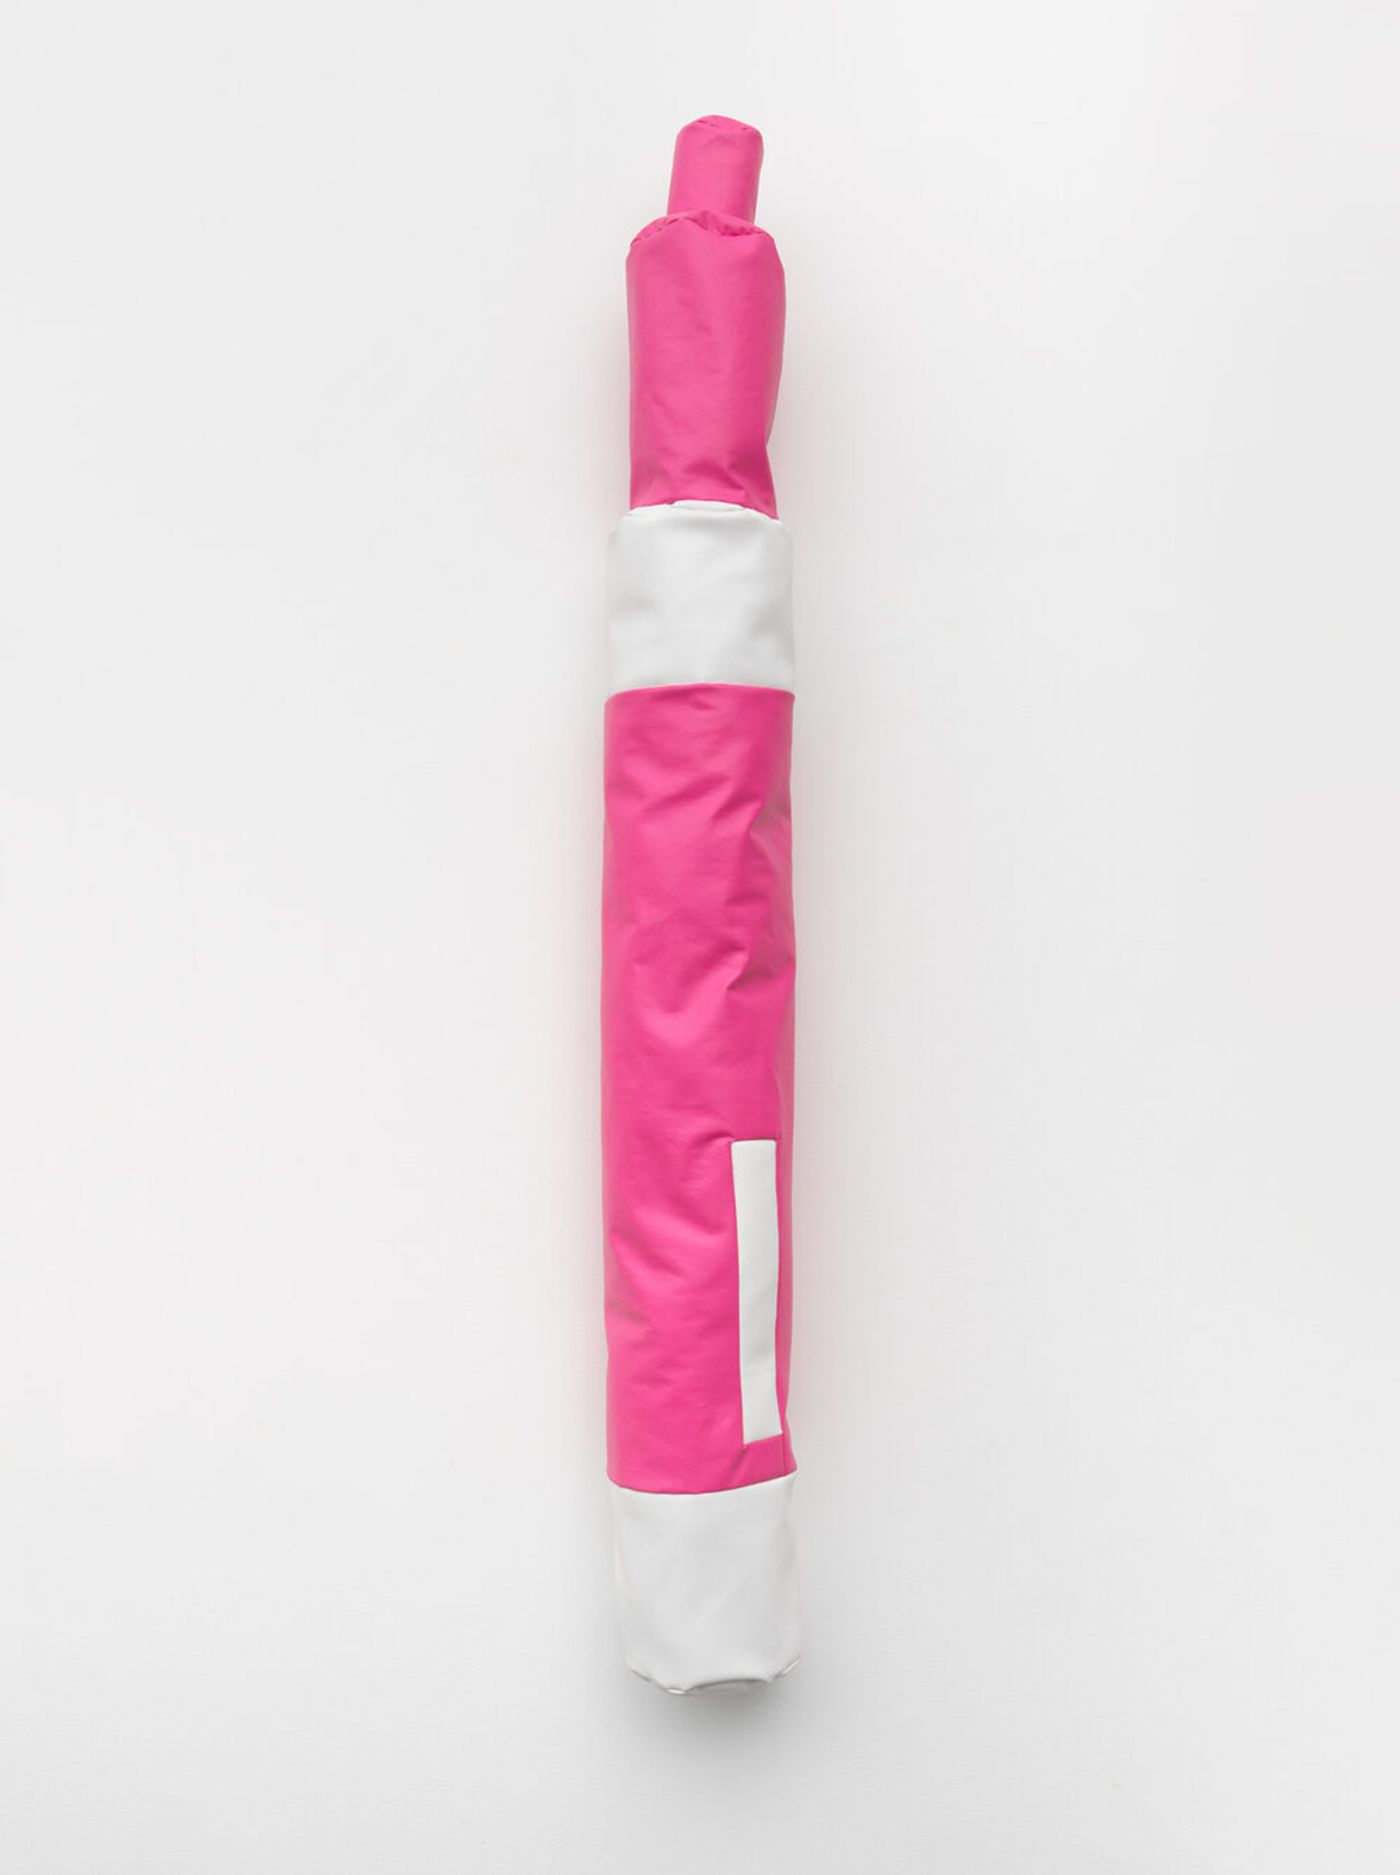 Image of Soft Pink Dry Erase Marker, 2019: Vinyl and polyfill